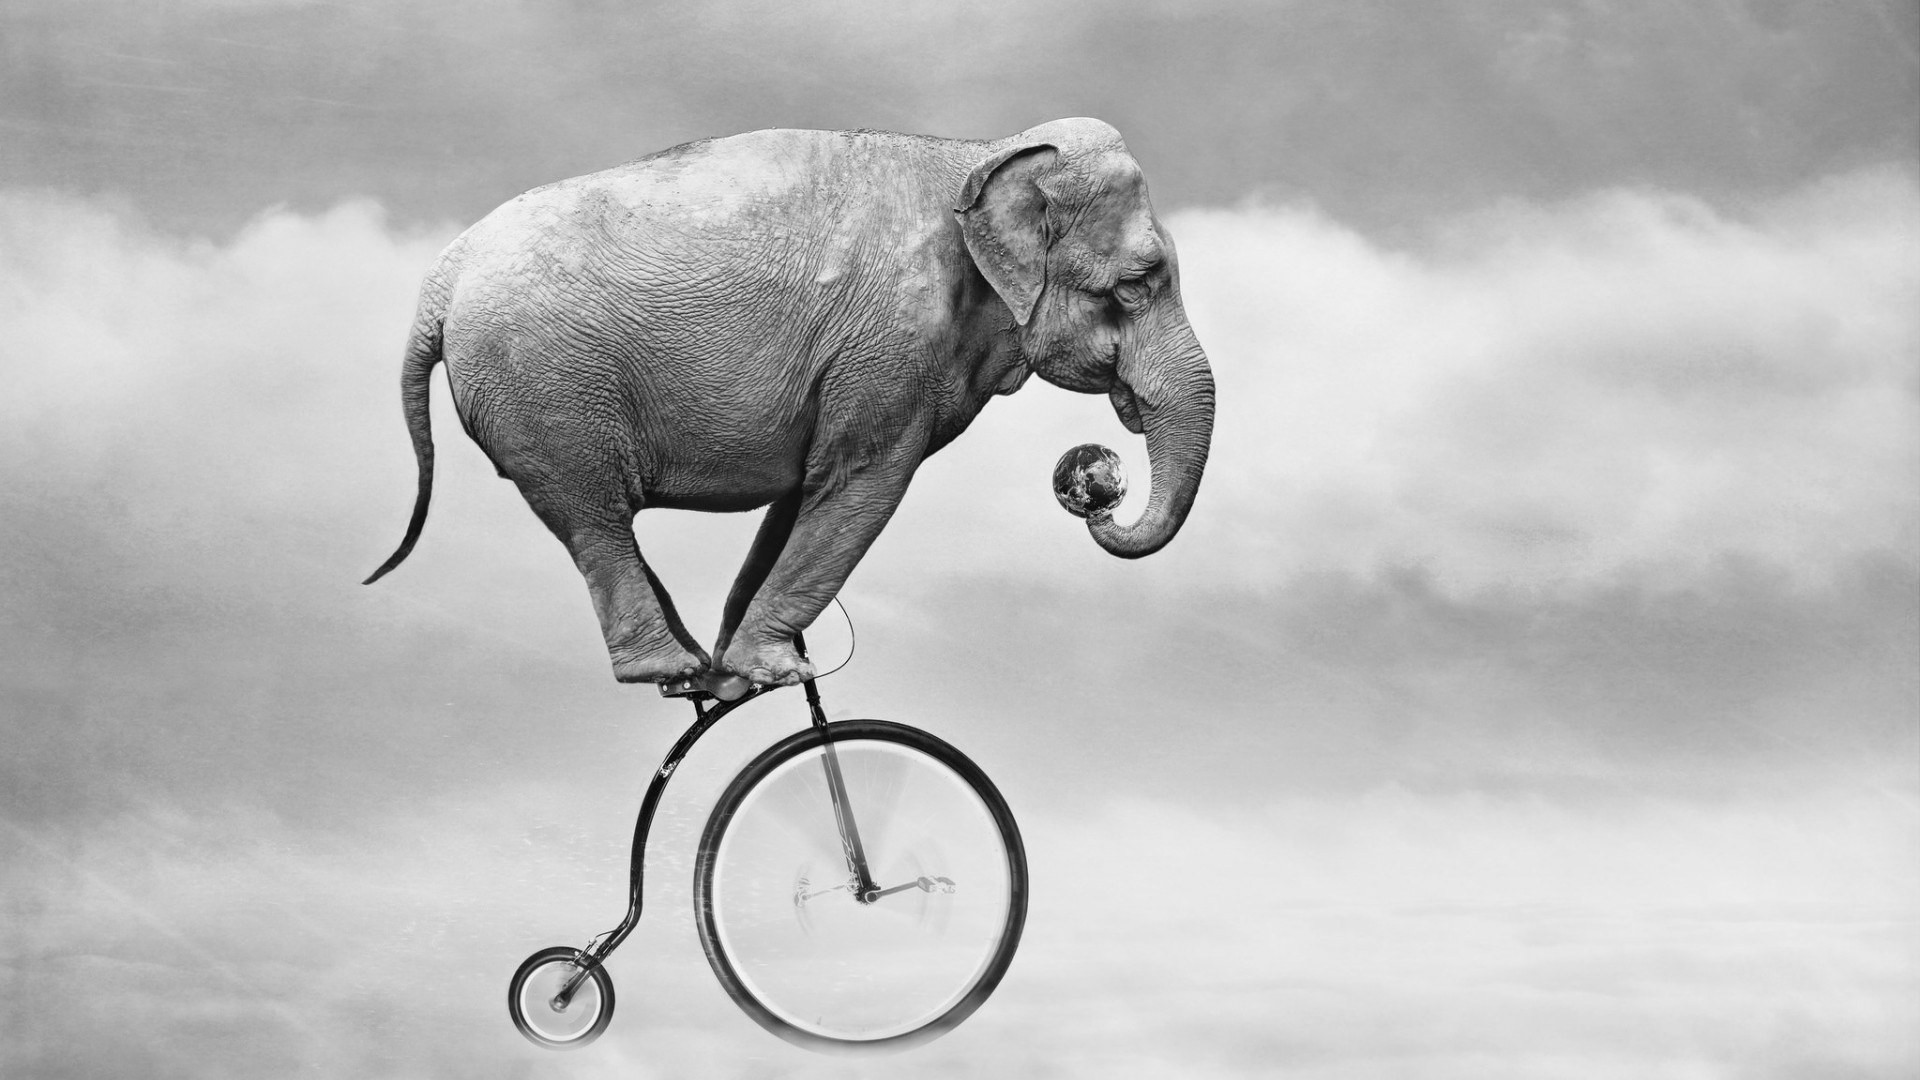 General 1920x1080 animals elephant bicycle humor monochrome clouds motion blur side view profile smoke background vehicle mammals